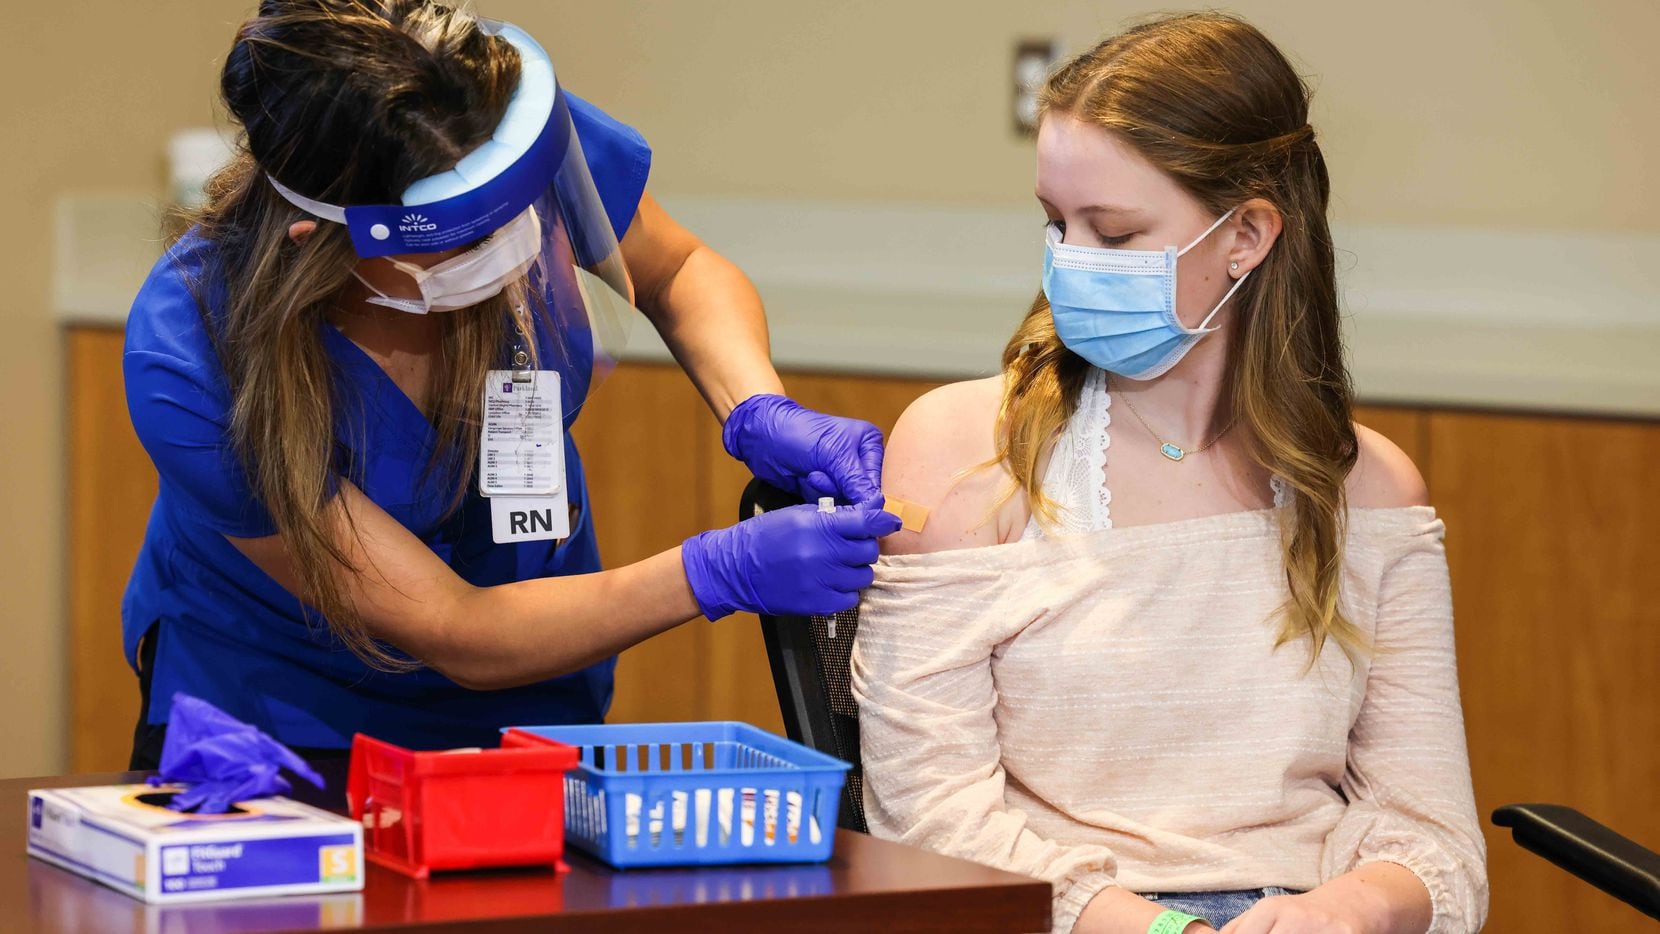 Madeleine Jenkins, 15, Dallas County Judge Clay Jenkins' daughter, received a COVID-19 vaccine as the first minor under 16 to get vaccinated in Dallas County at WISH Clinic Building at Parkland Memorial Hospital on May 13, 2021.